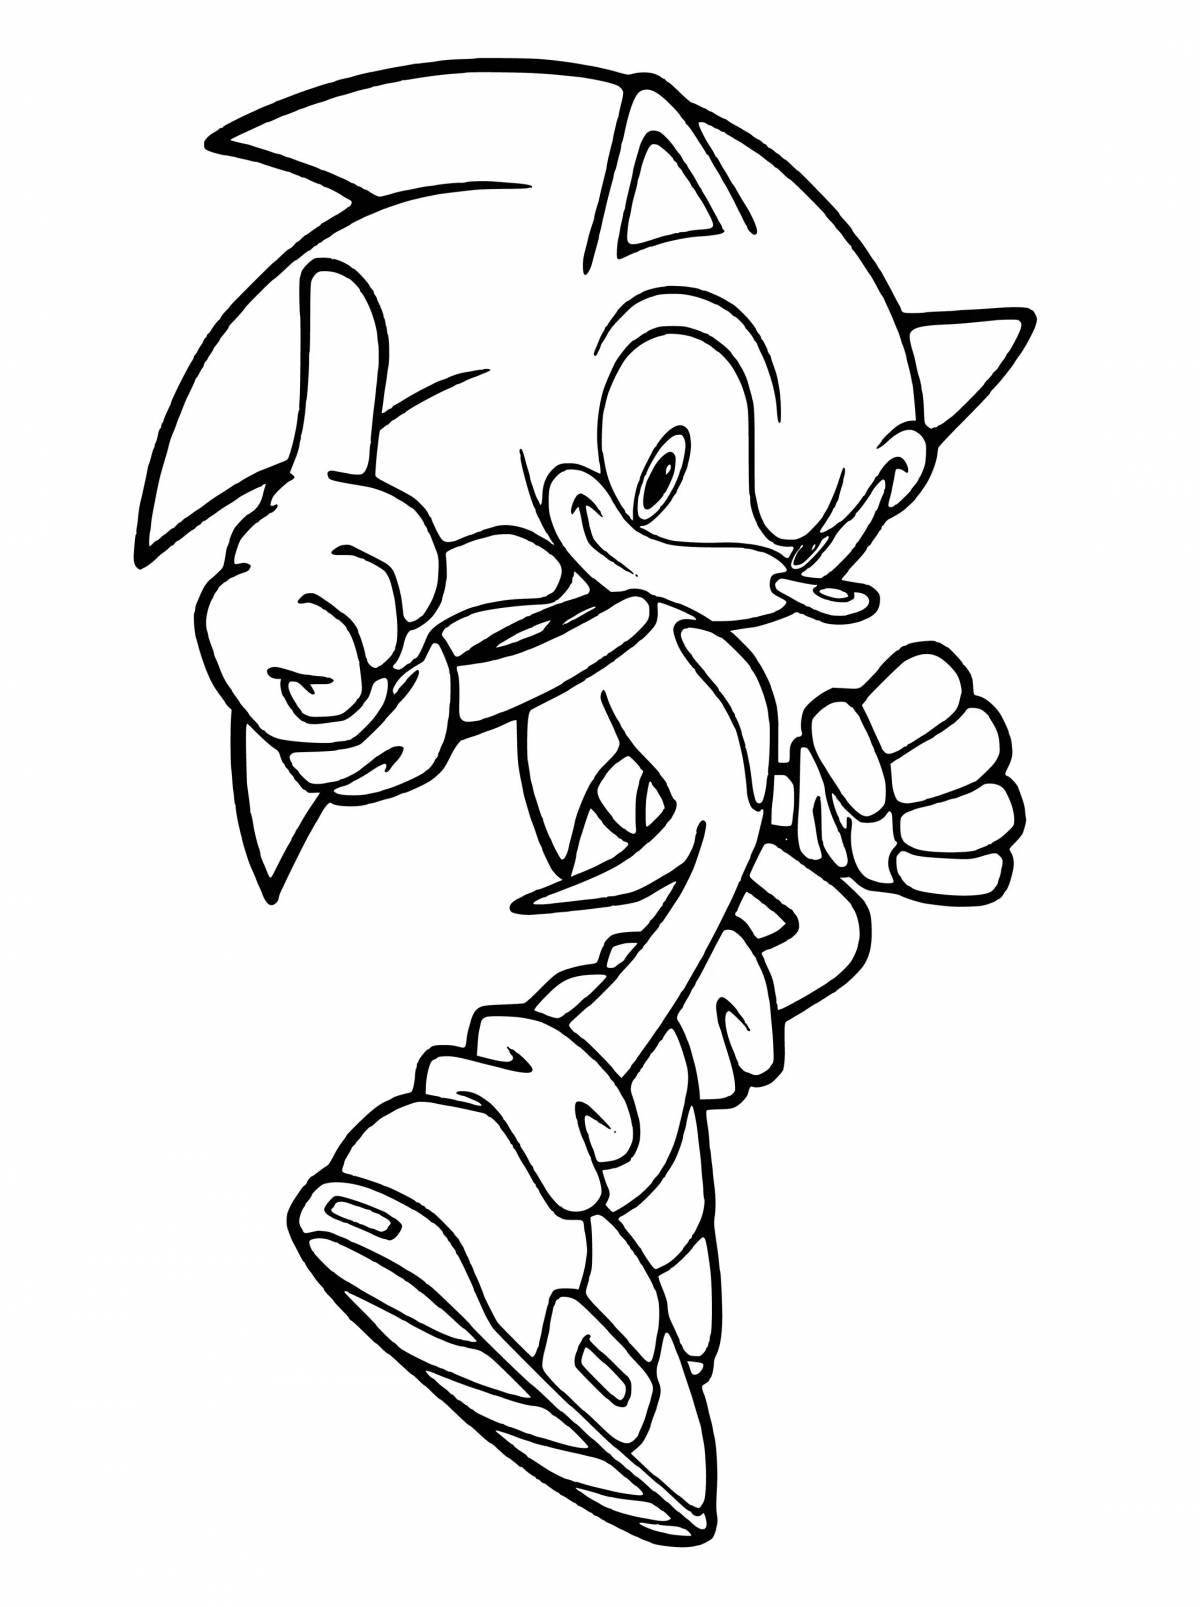 Radiant coloring page super knuckles